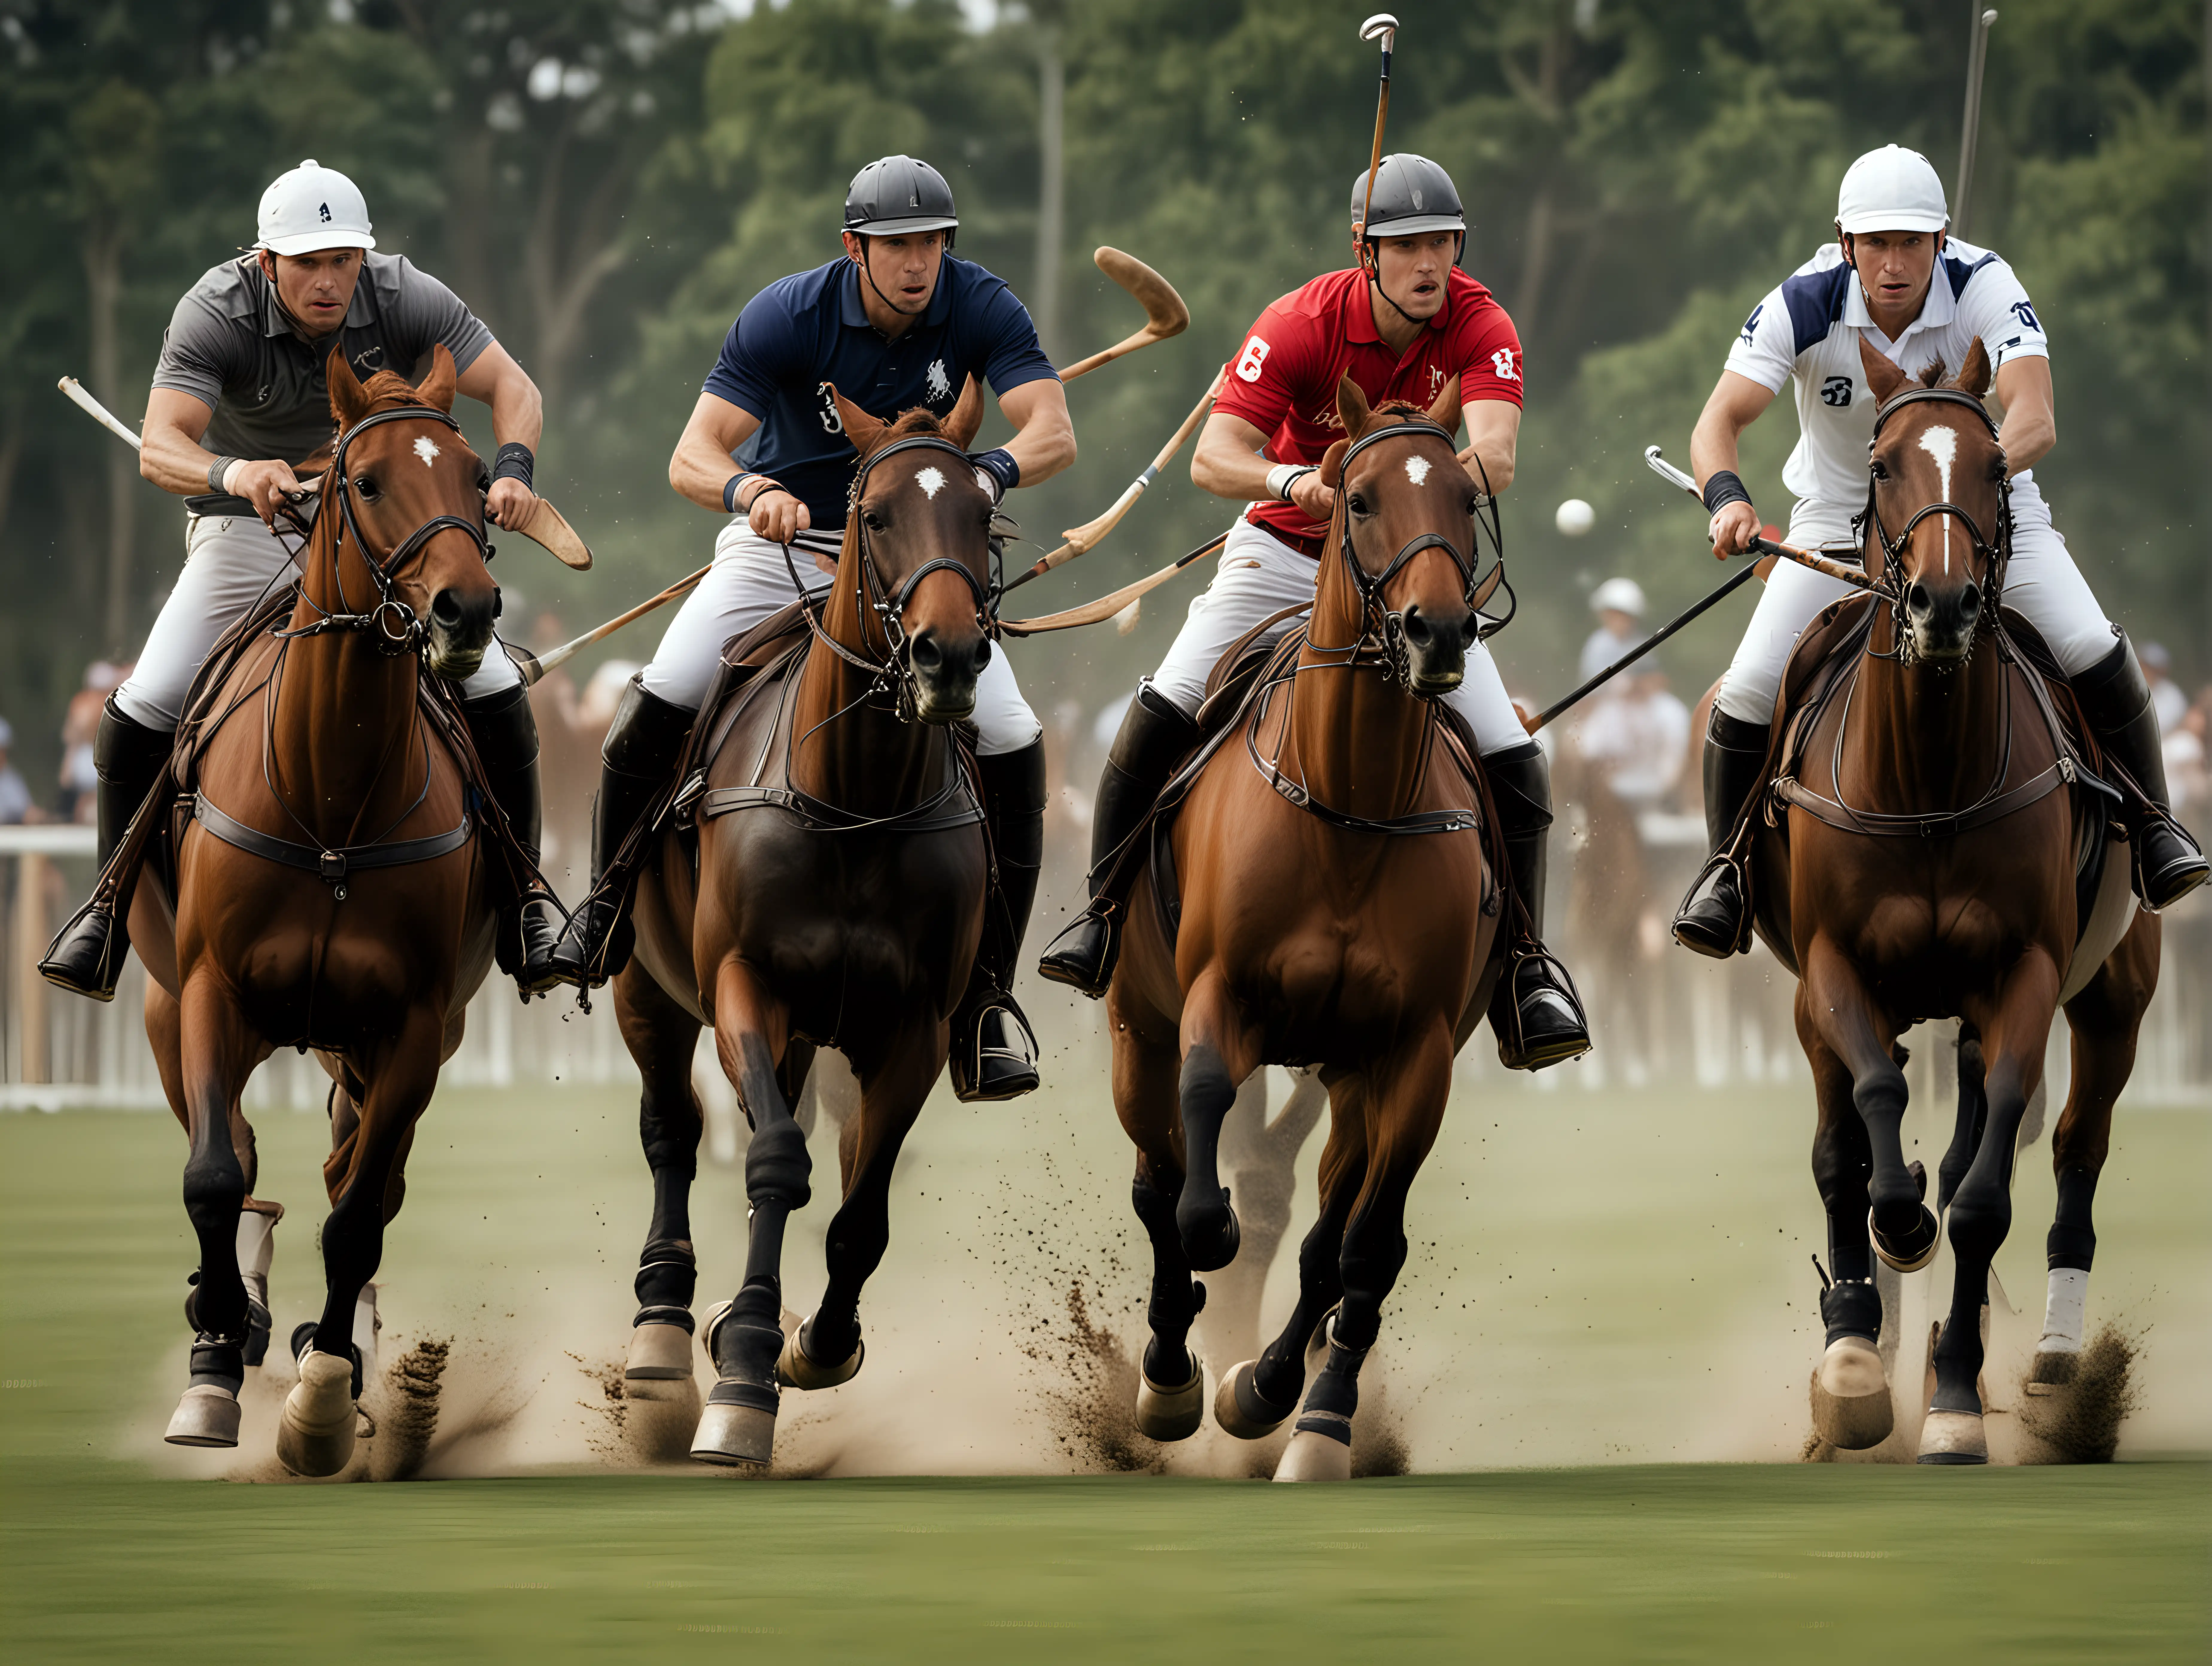 Intense Polo Players Riding in Formation for the Ball